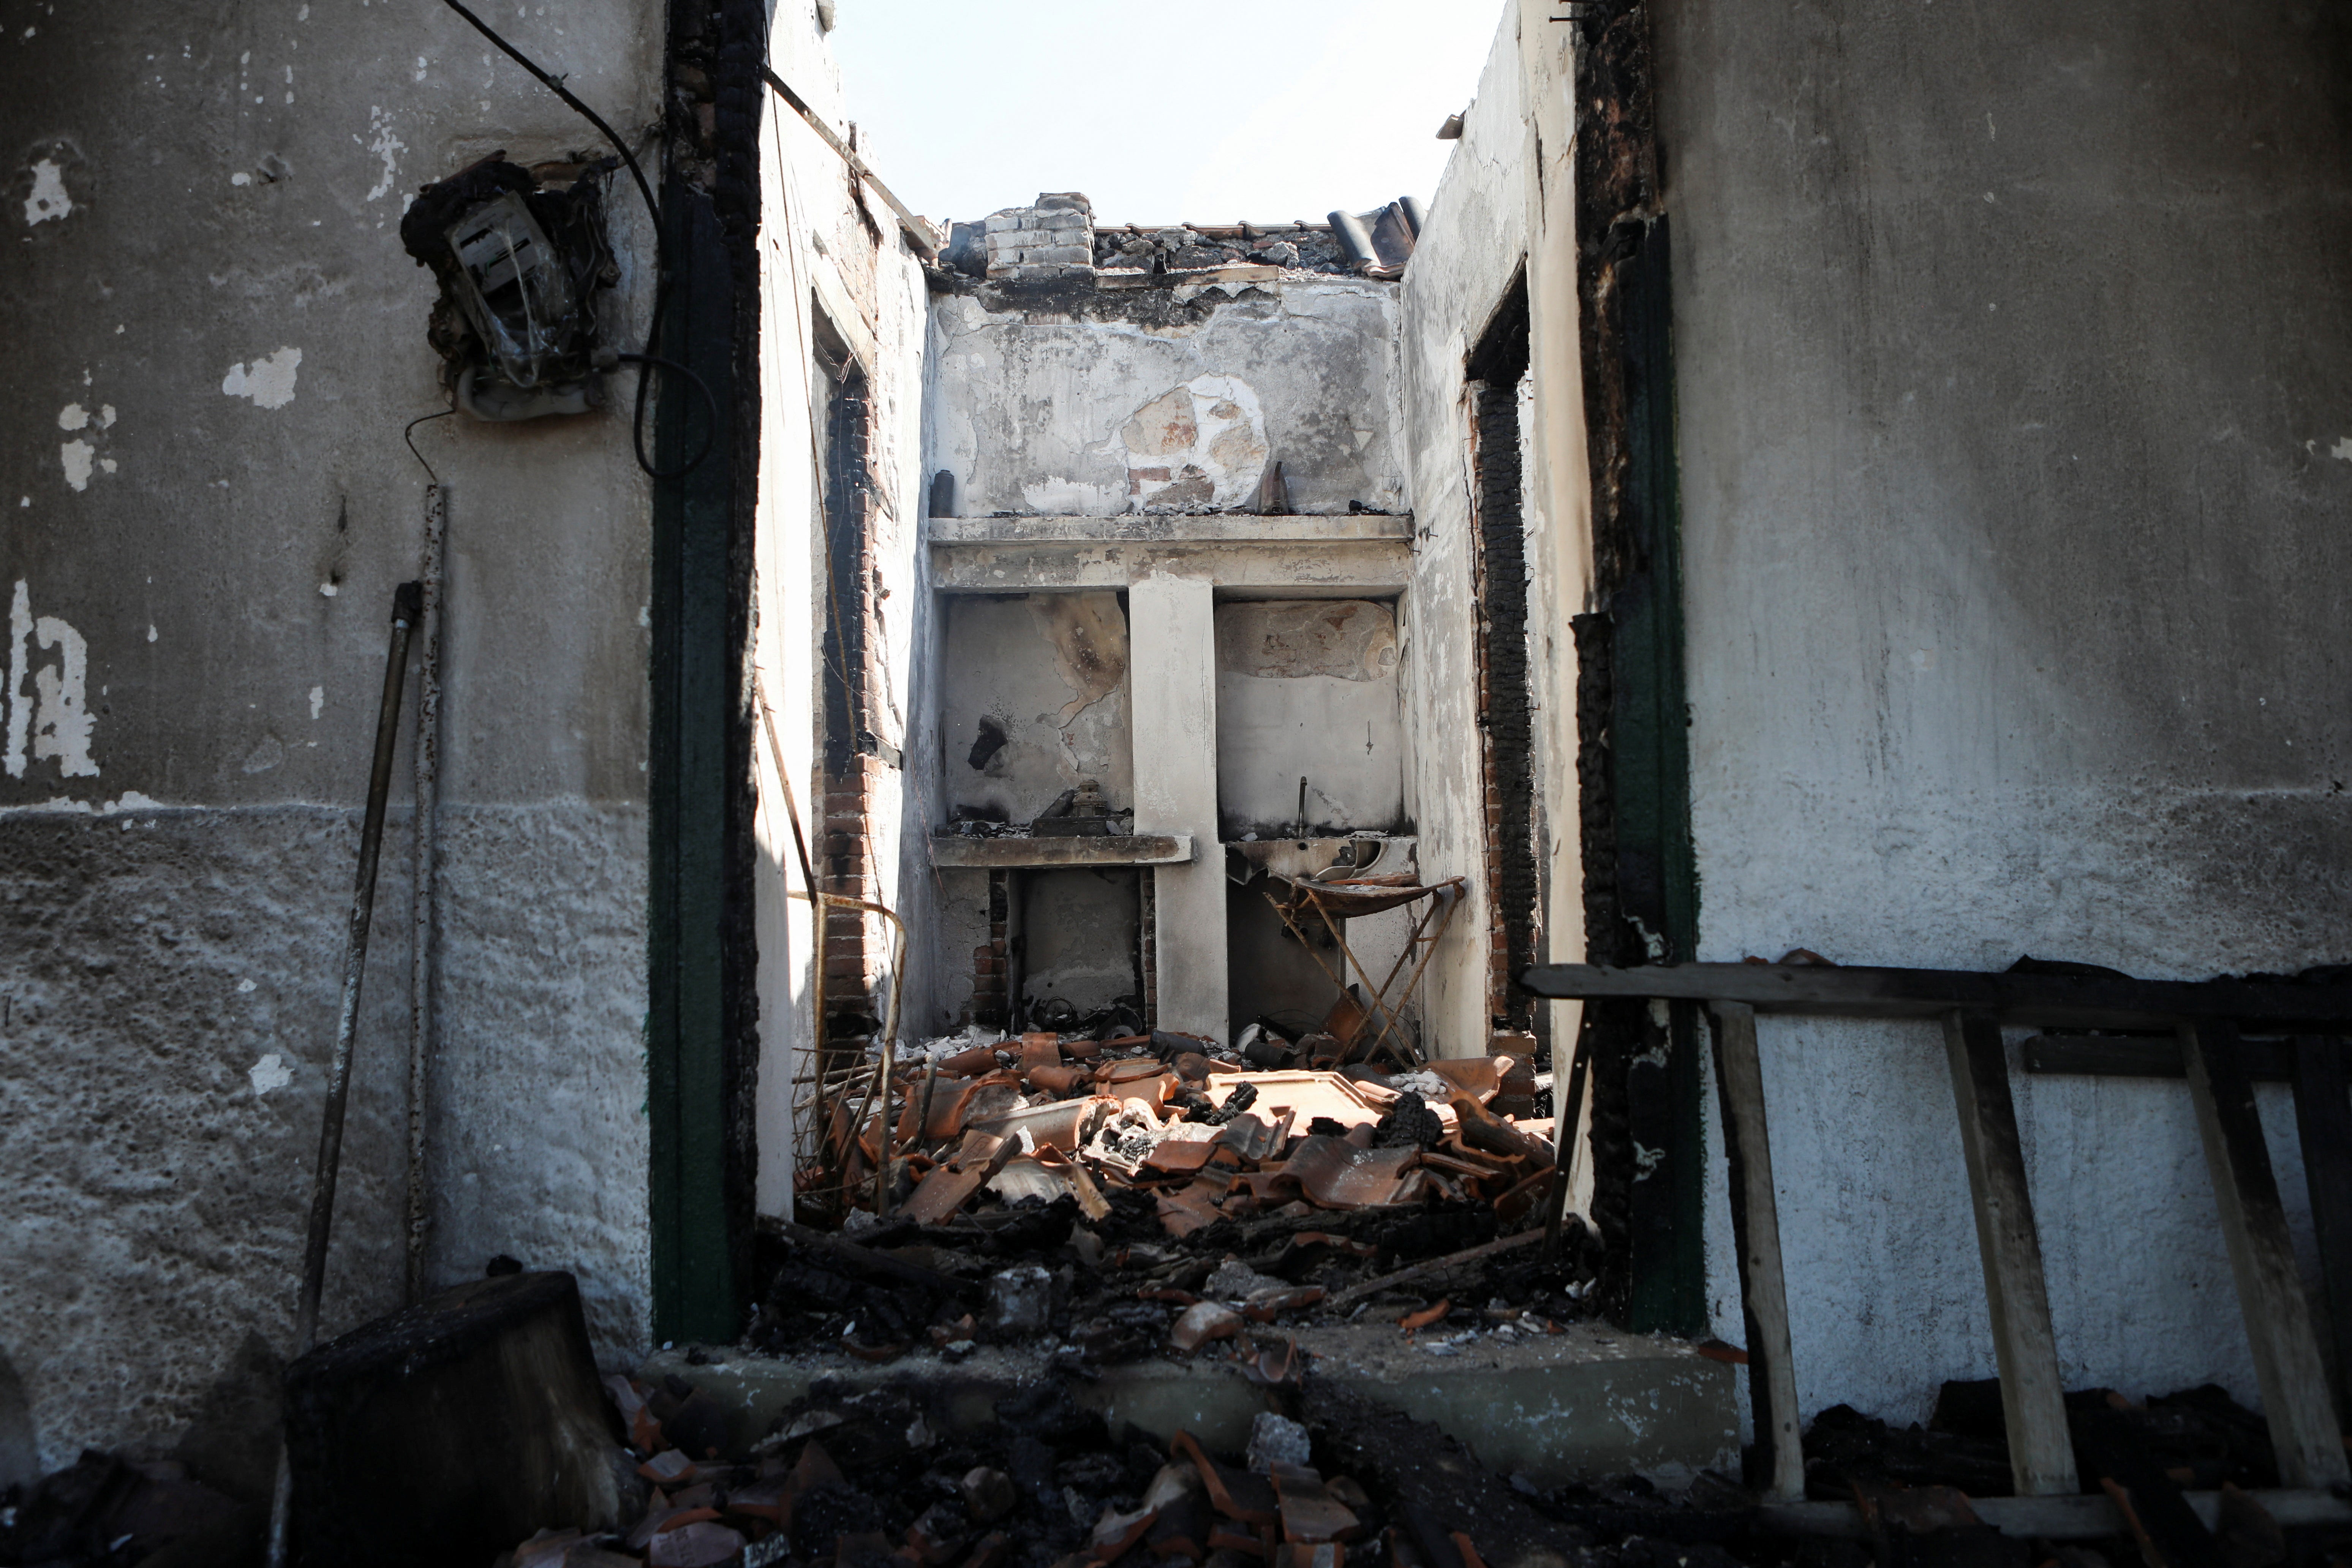 View of the interior of a burnt house on the Aegean island of Lesbos